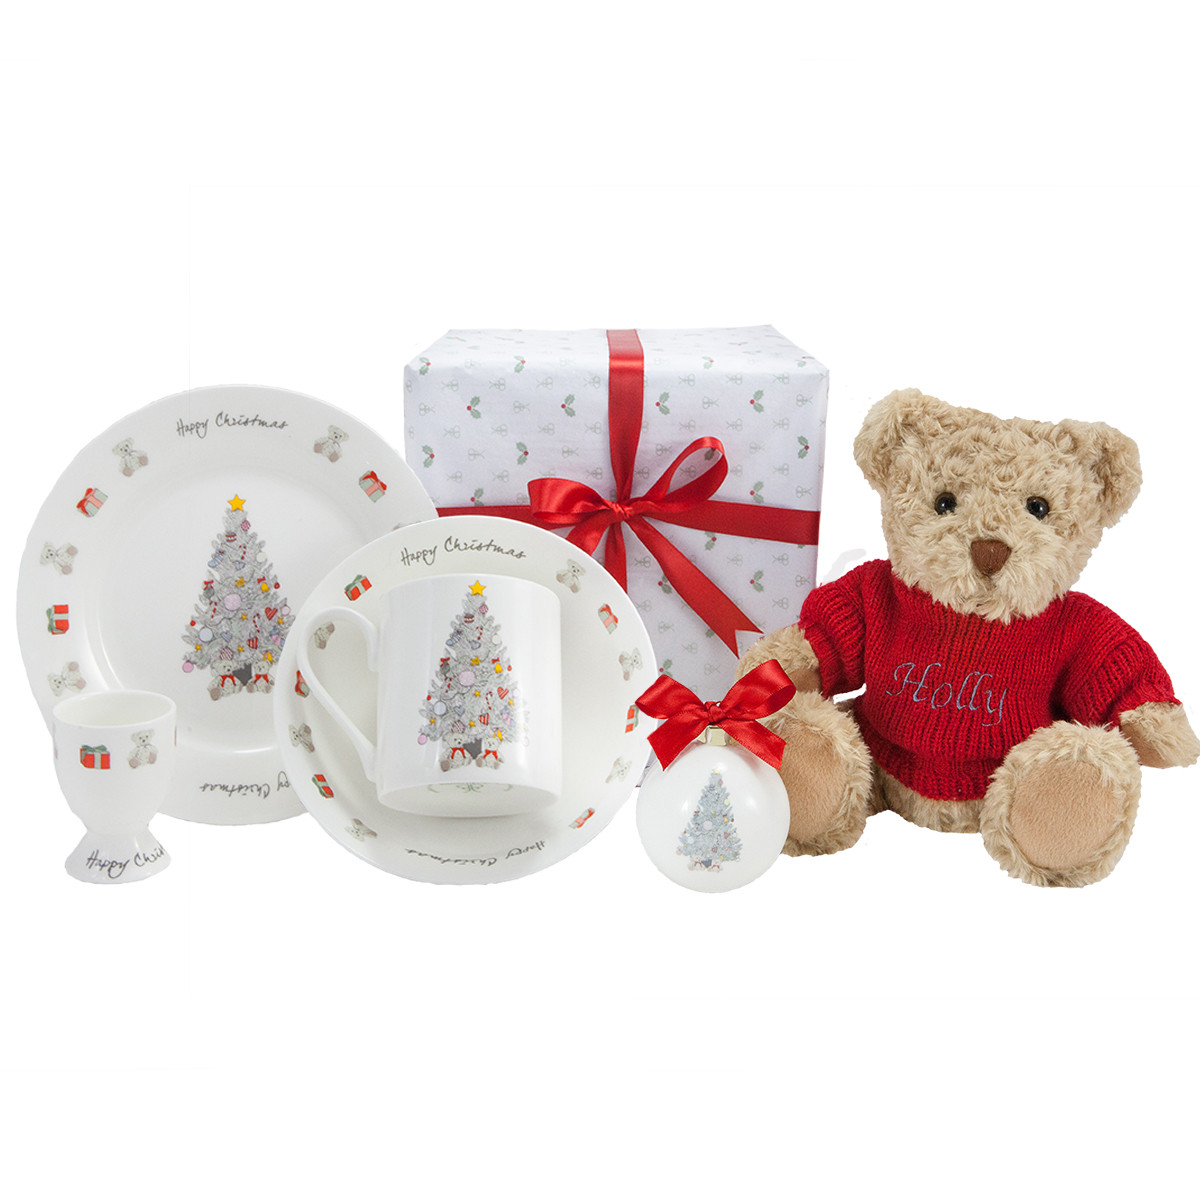 Baby'S First Christmas Gift Ideas
 The Syders Baby s First Christmas Gift Ideas